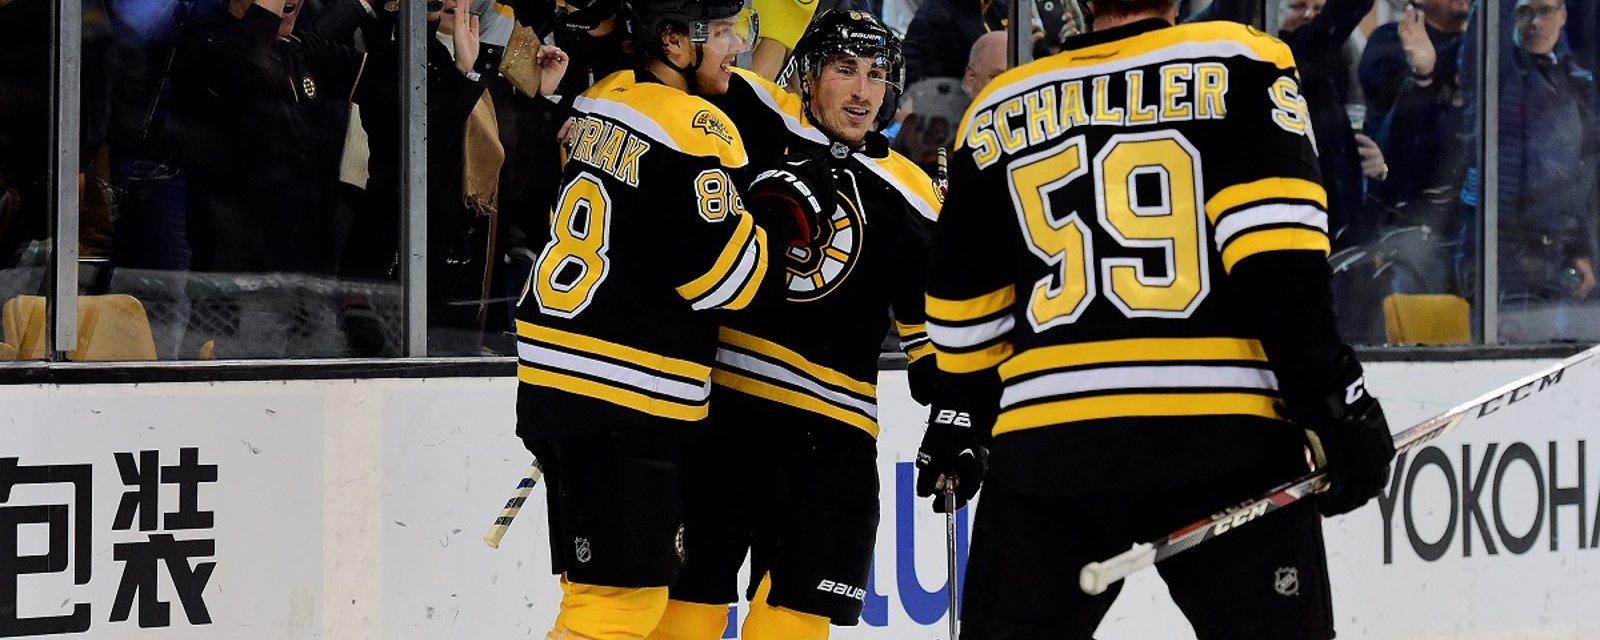 Bruins forward may force Boston to commit to a long-term deal.